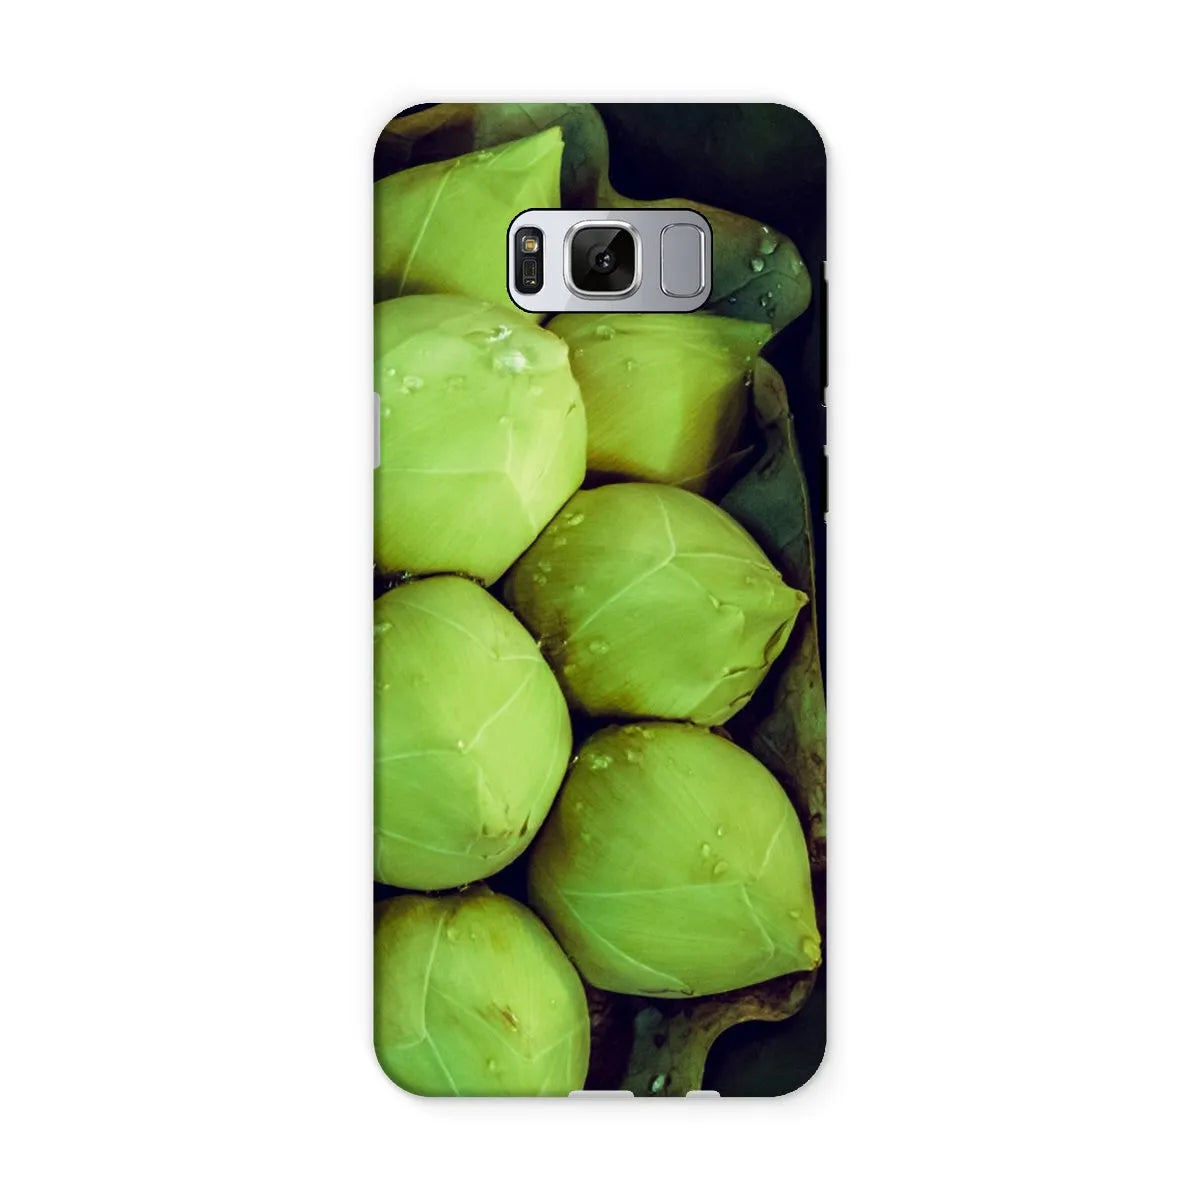 Ingenues Tough Phone Case - Samsung Galaxy S8 / Matte - Mobile Phone Cases - Aesthetic Art